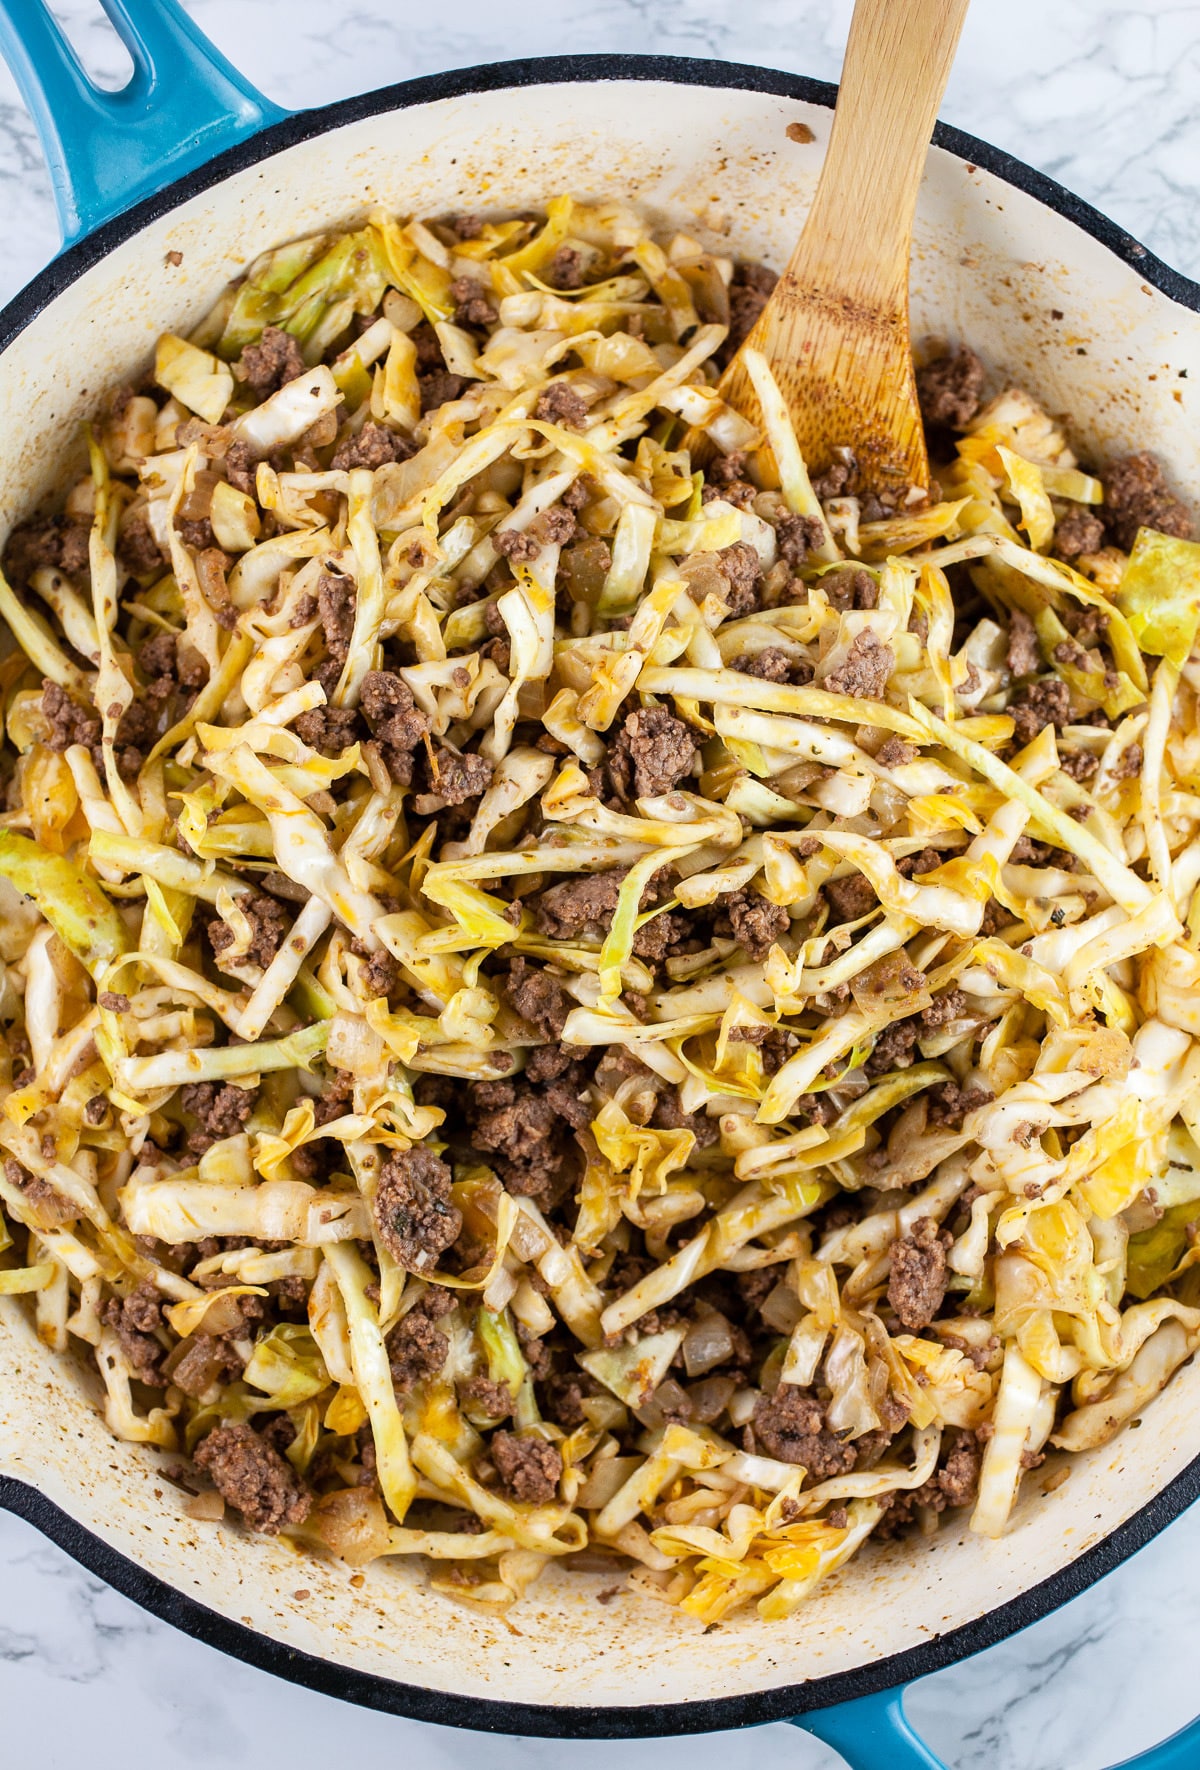 Cooked ground beef and cabbage mixture in skillet.